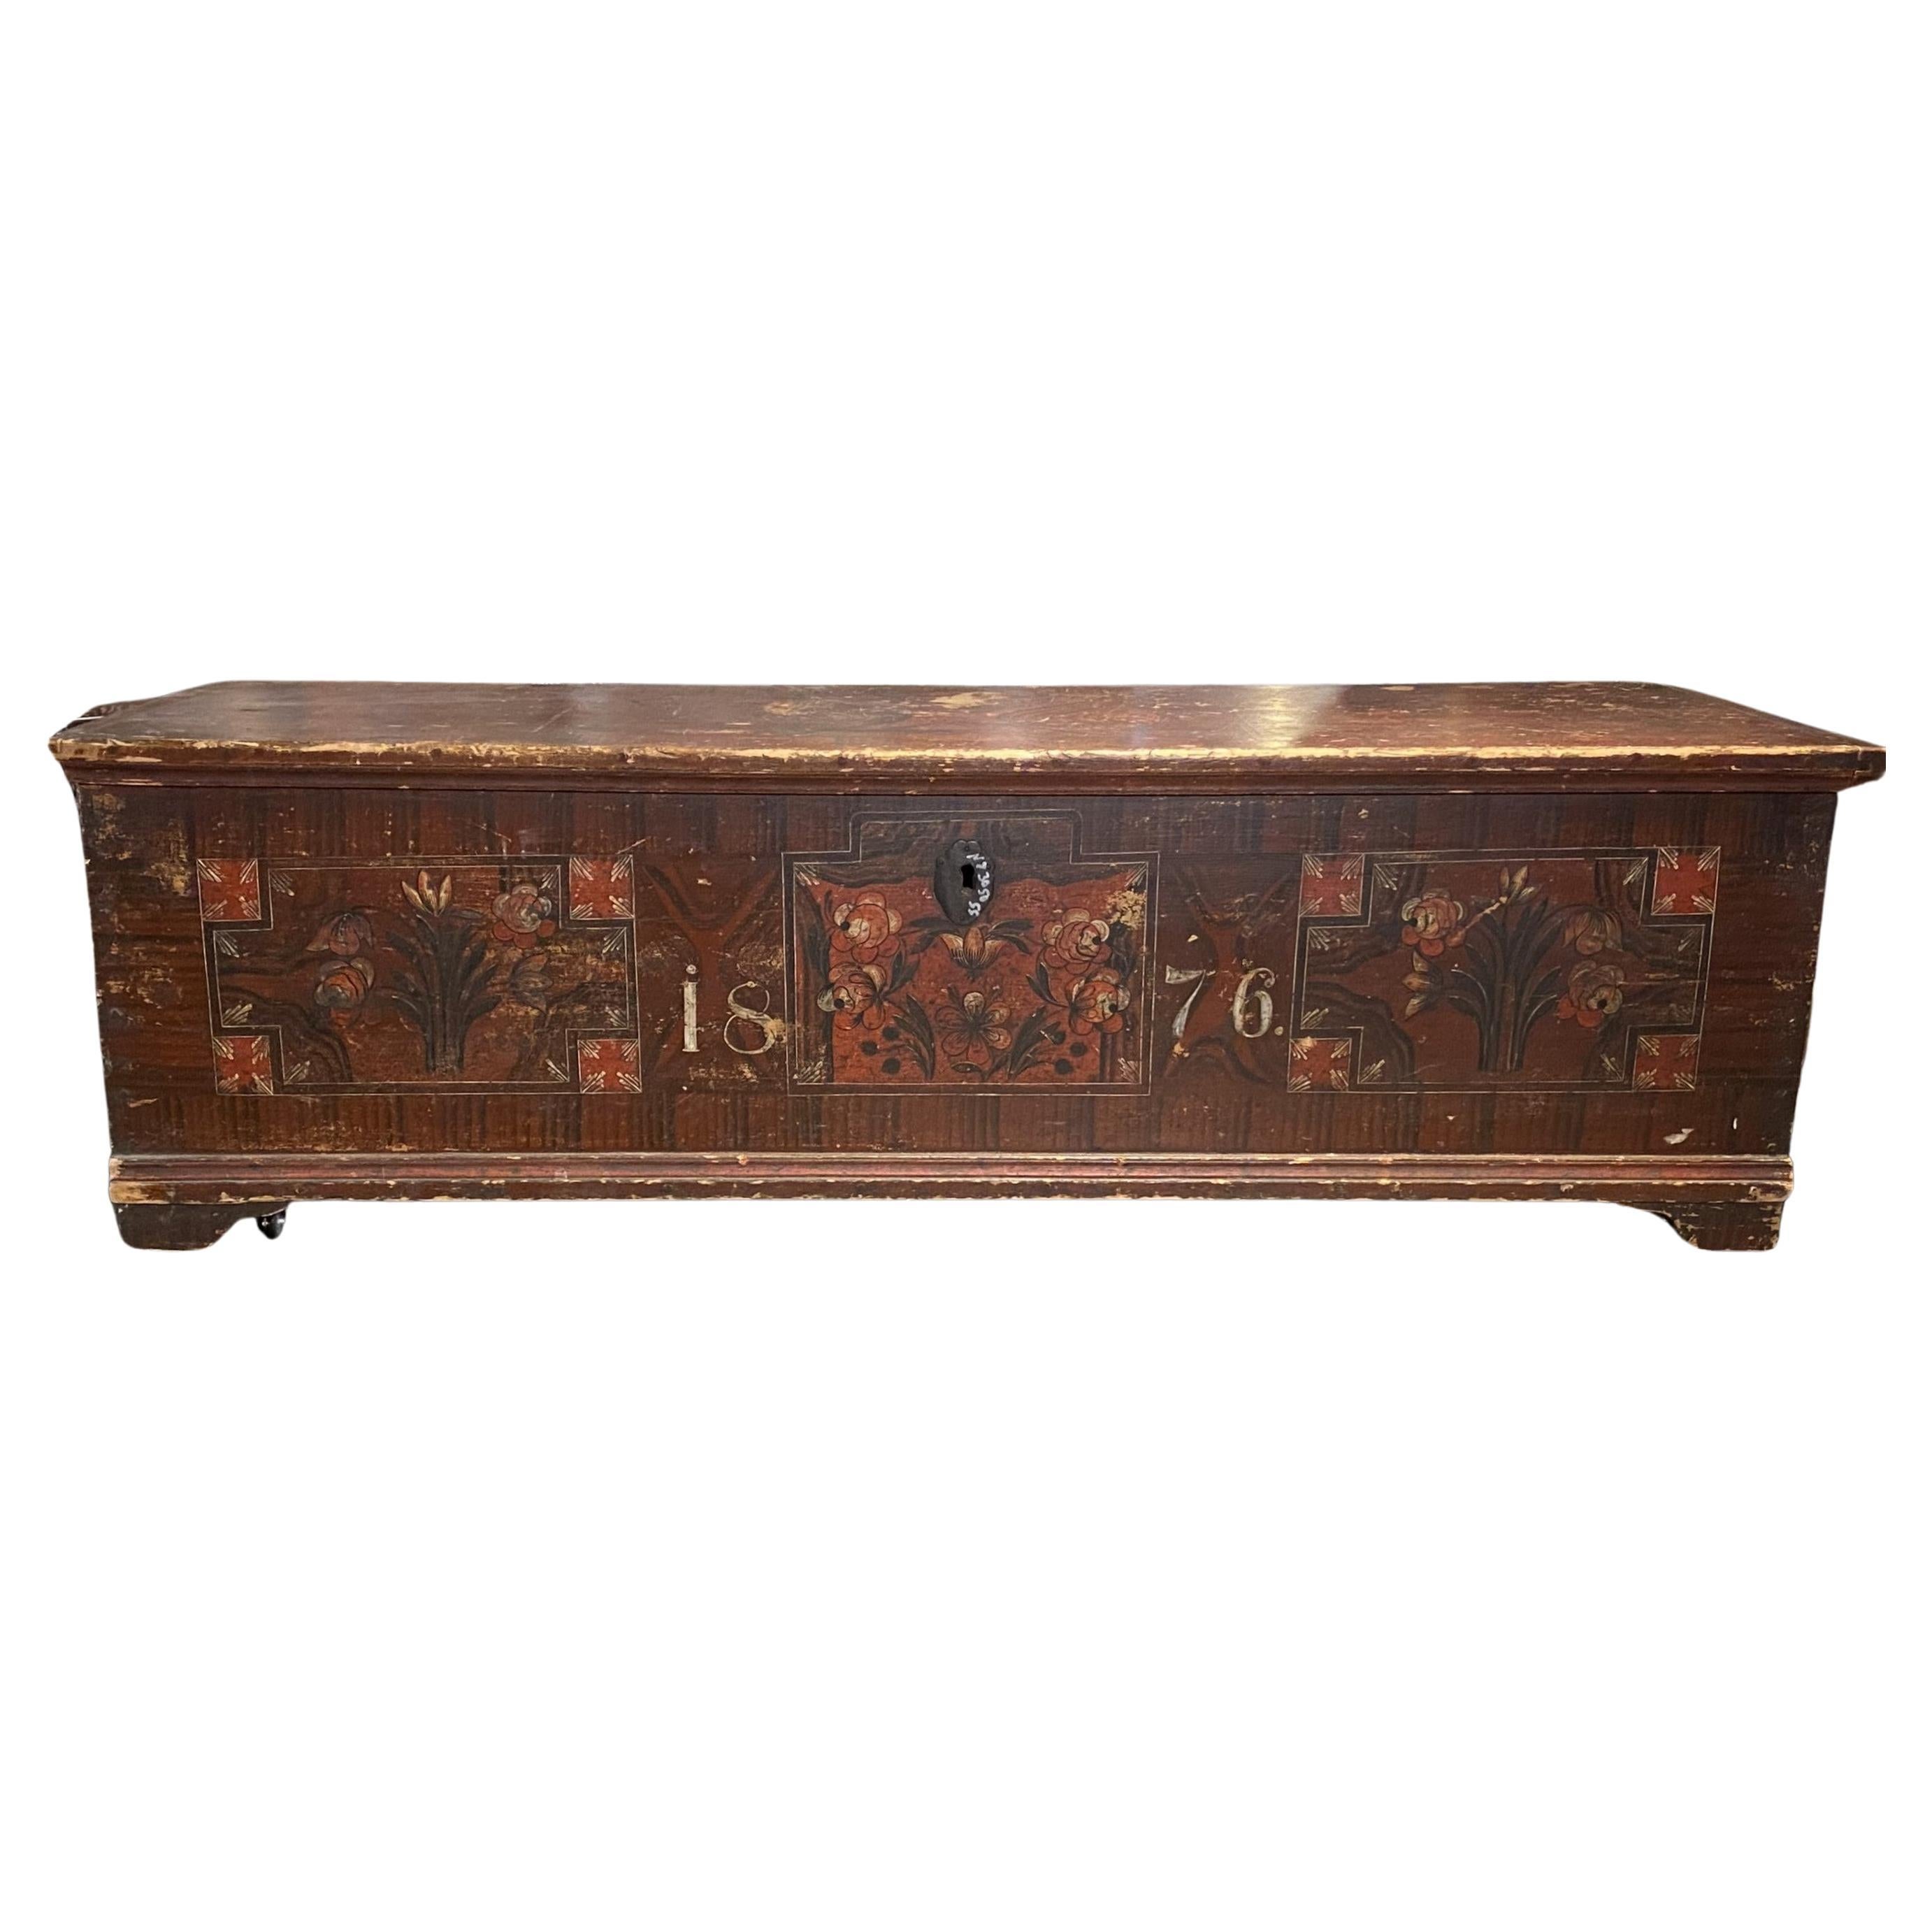 European Pine Paint Decorated Blanket Chest Dated 1876